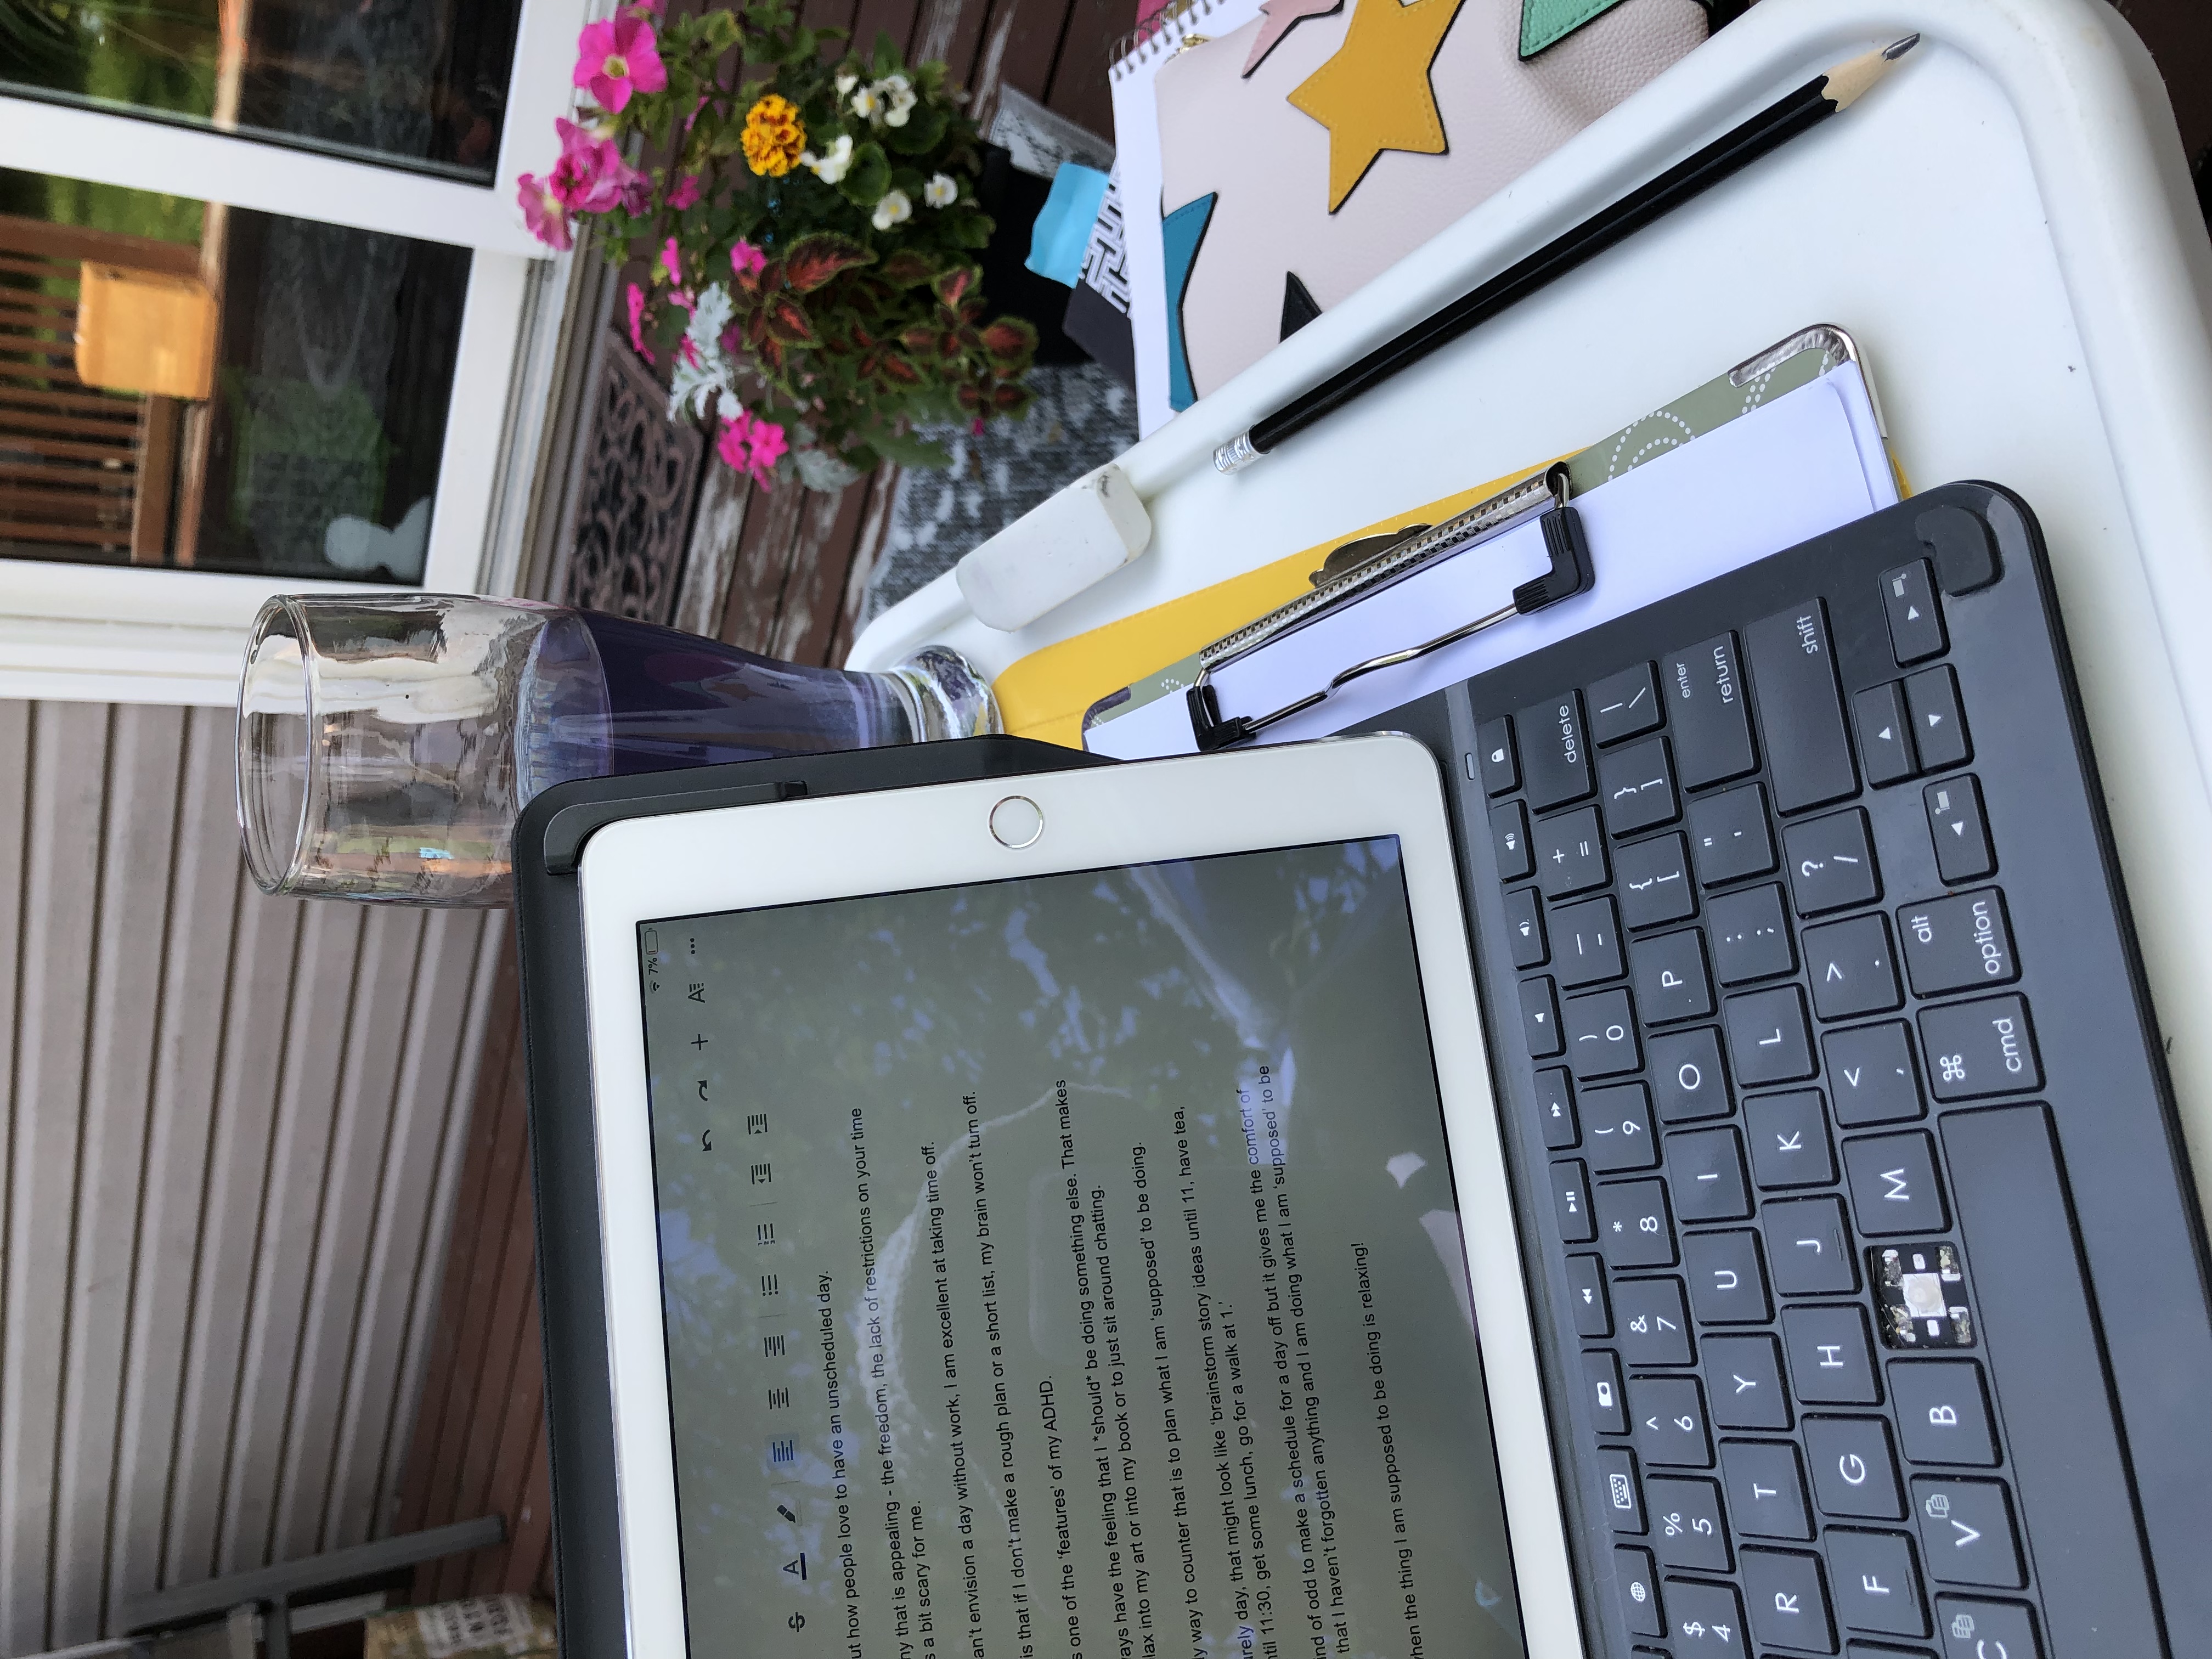 The author’s iPad sits on a white table on a patio, there is a tall glass of blue tea in the background and there are notebooks and a pencil case nearby. There is a pot of flowers on the patio behind the table.